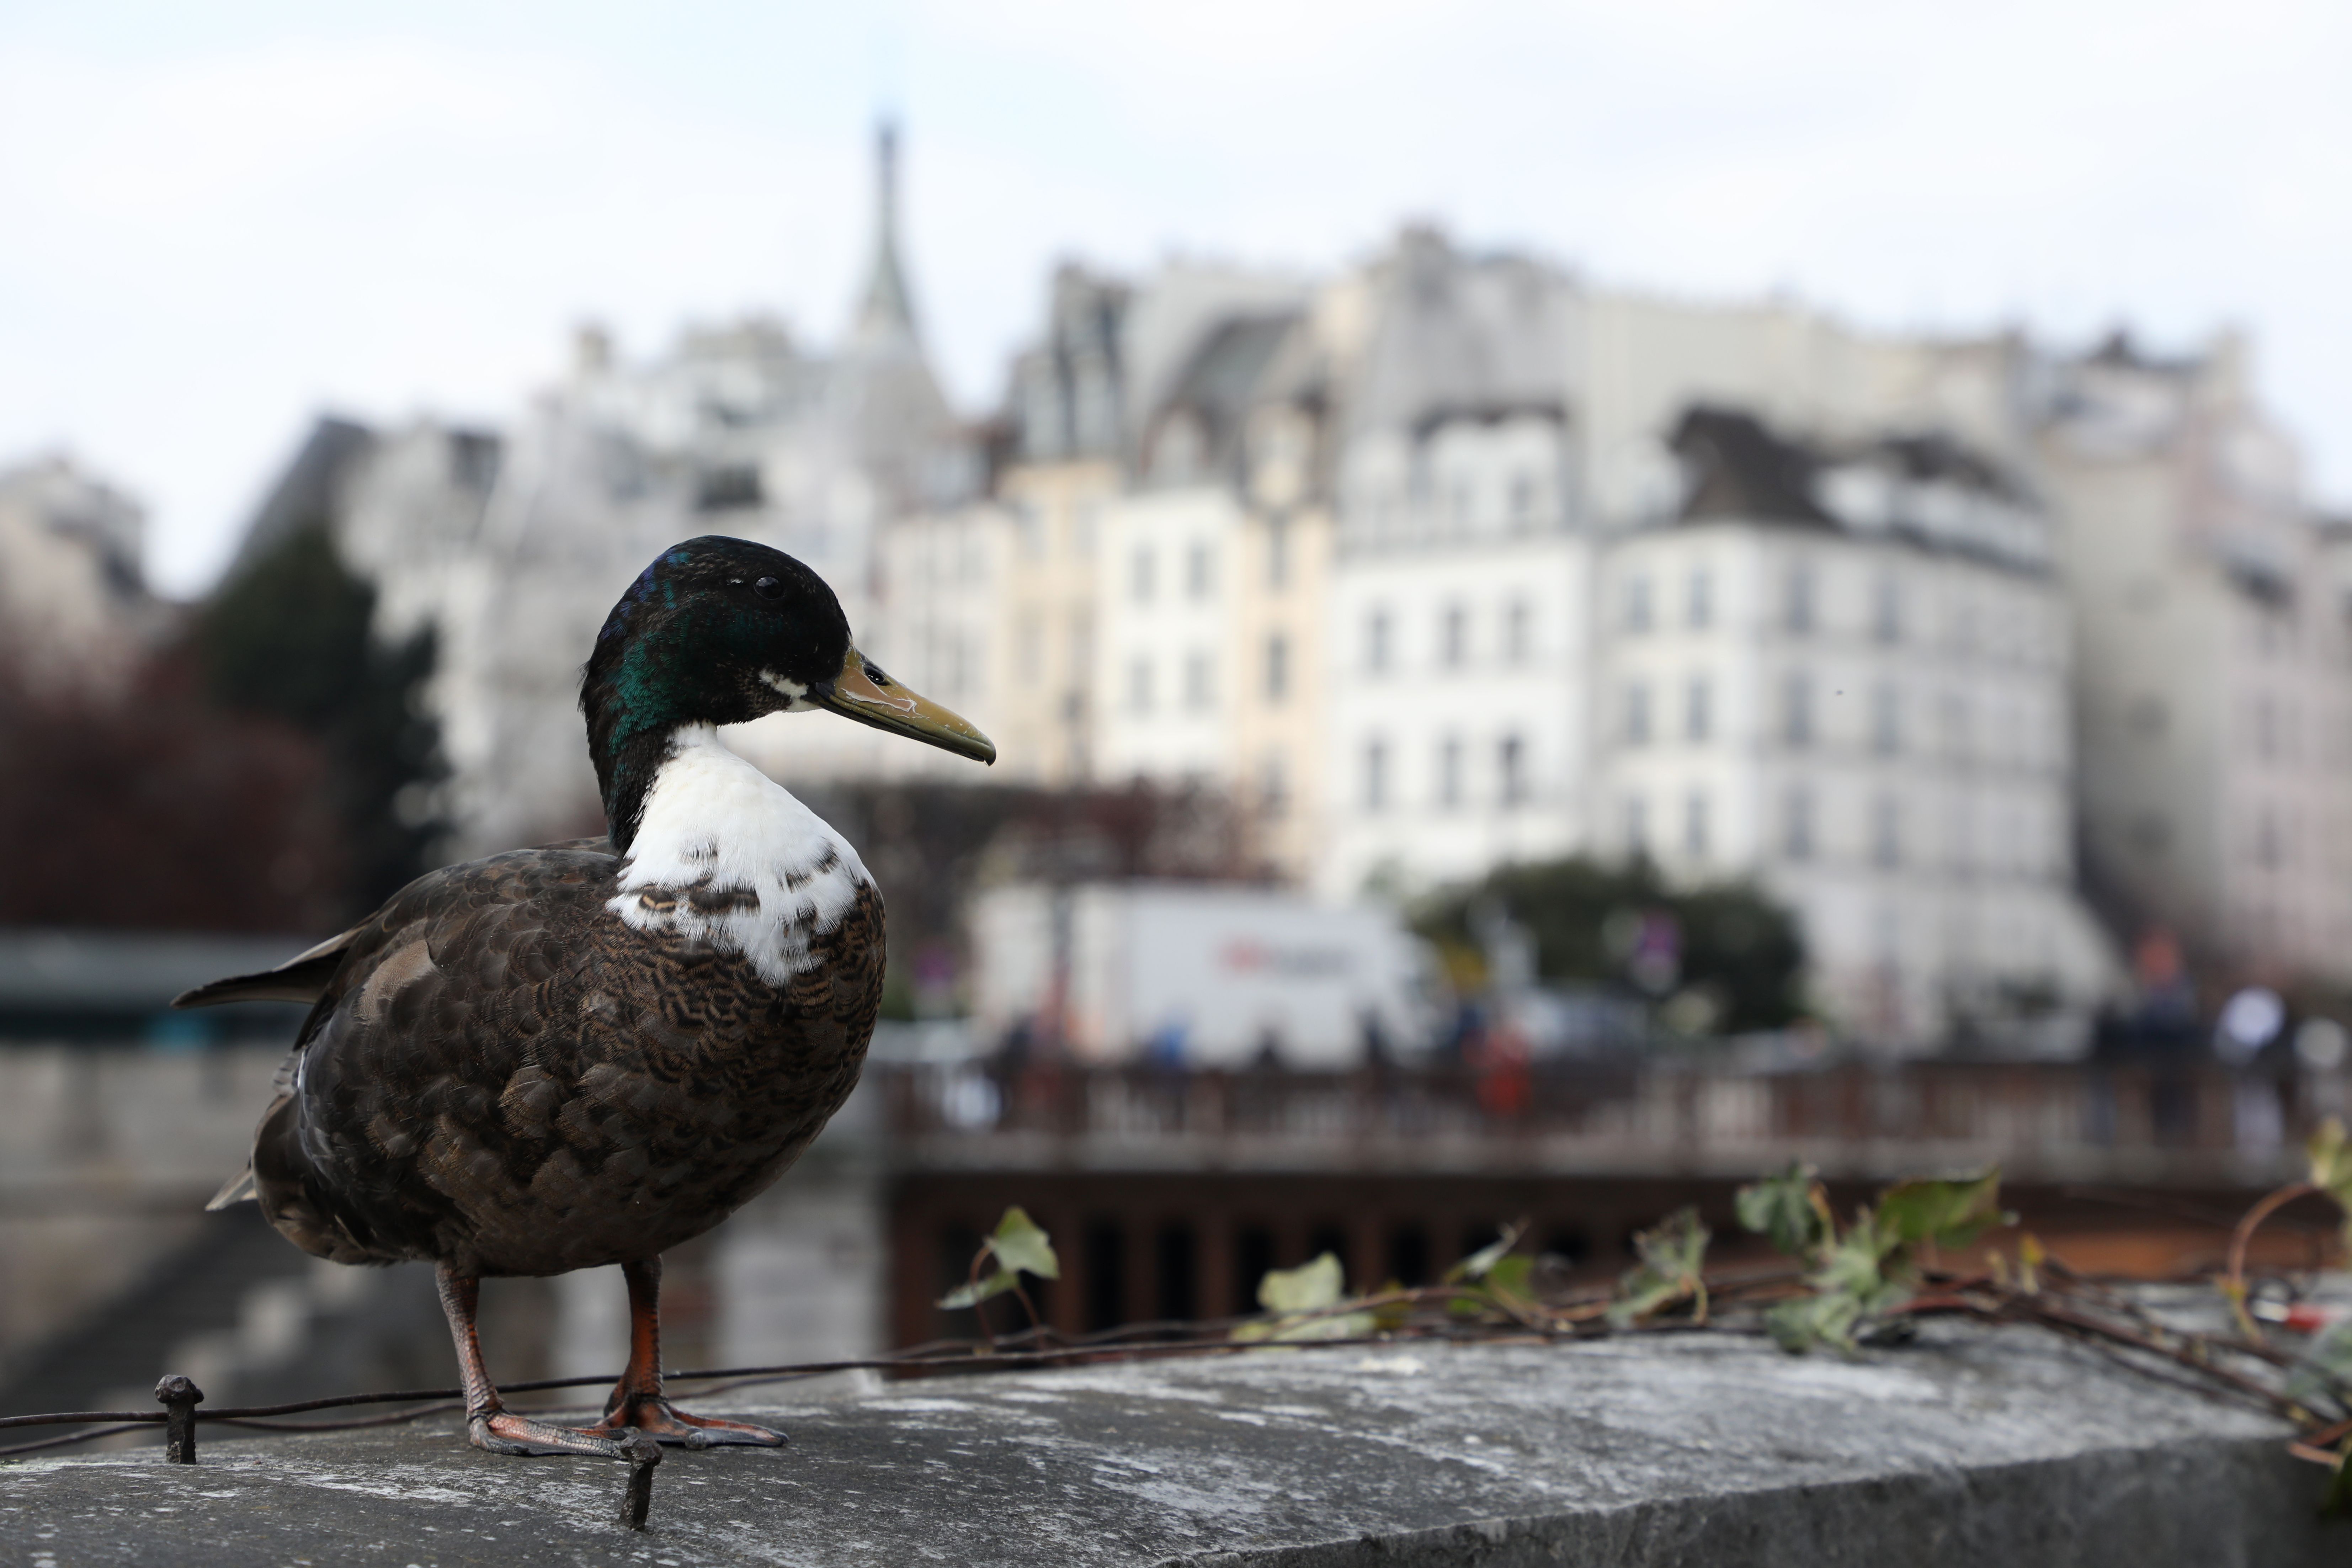 A Duclair duck stands on the banks of the river Seine in Paris on march 27, 2019. (LUDOVIC MARIN/AFP via Getty Images)